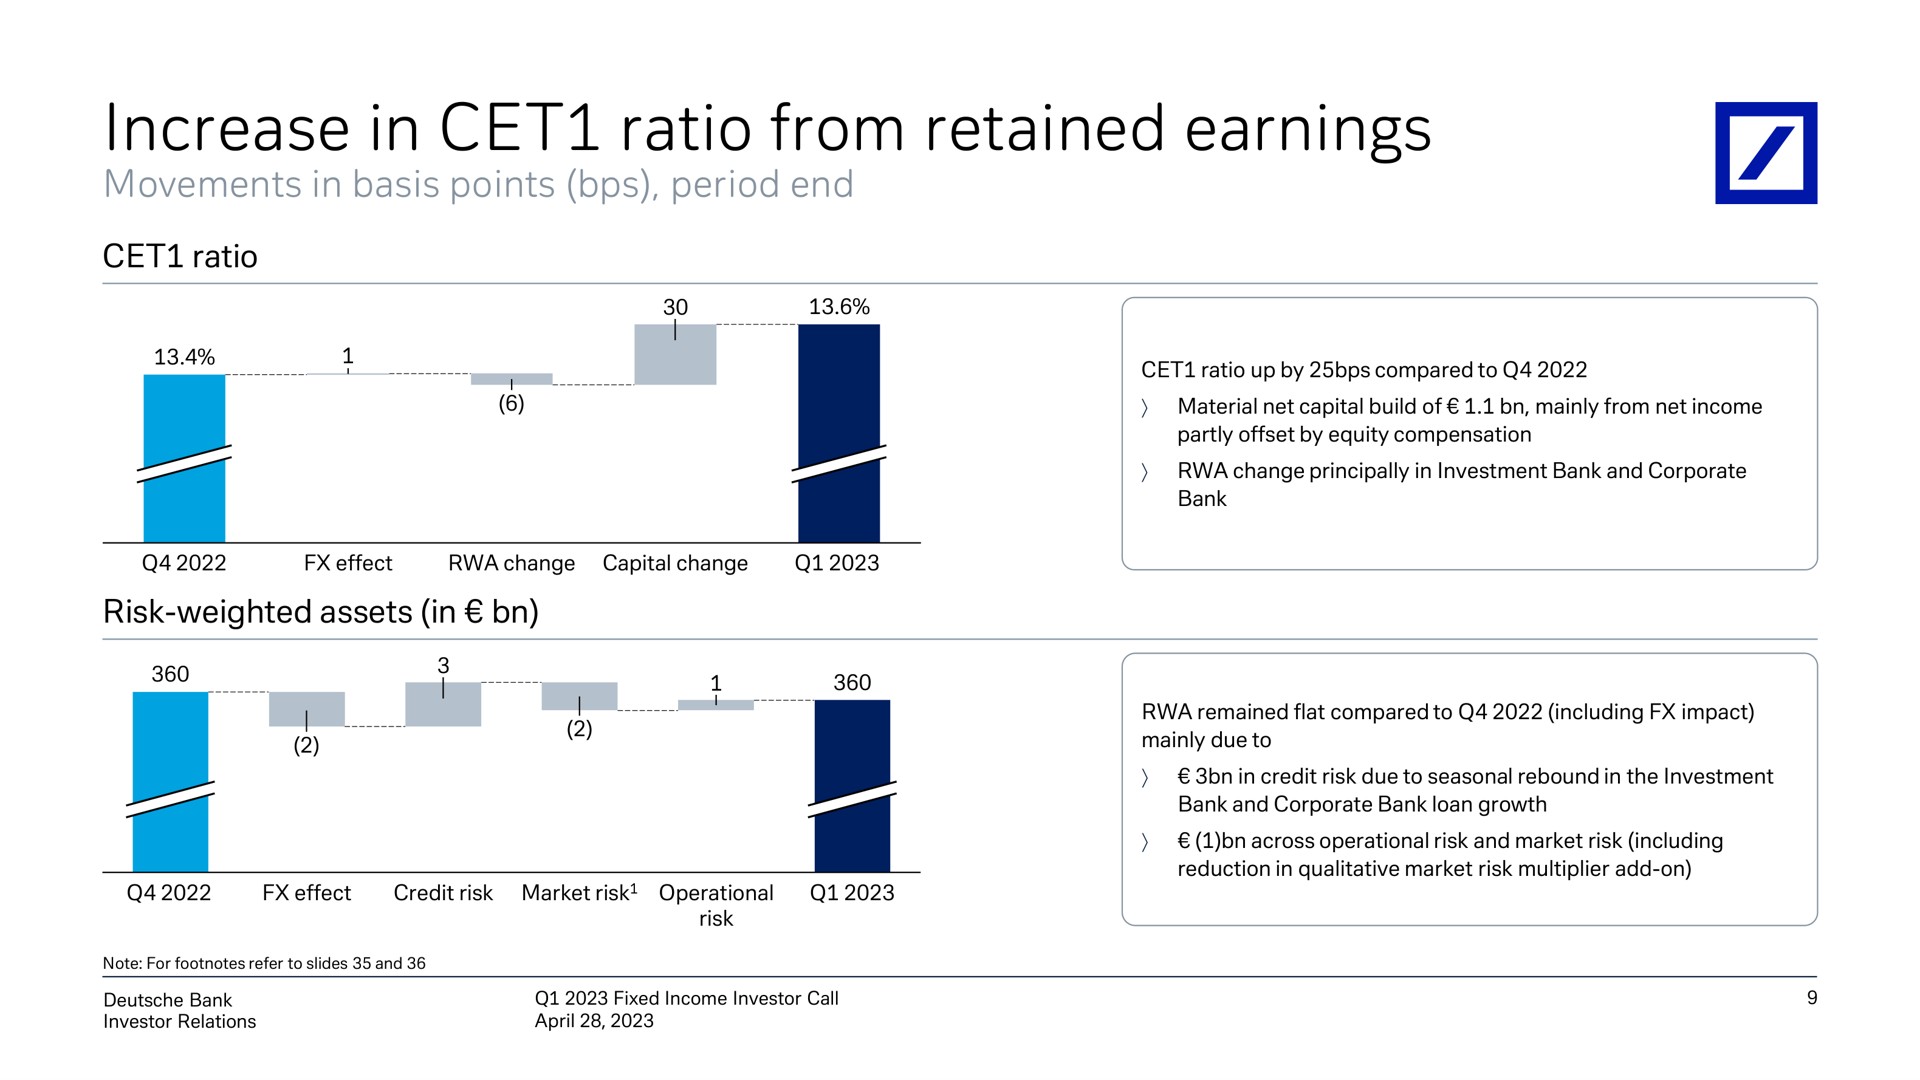 increase in ratio from retained earnings | Deutsche Bank